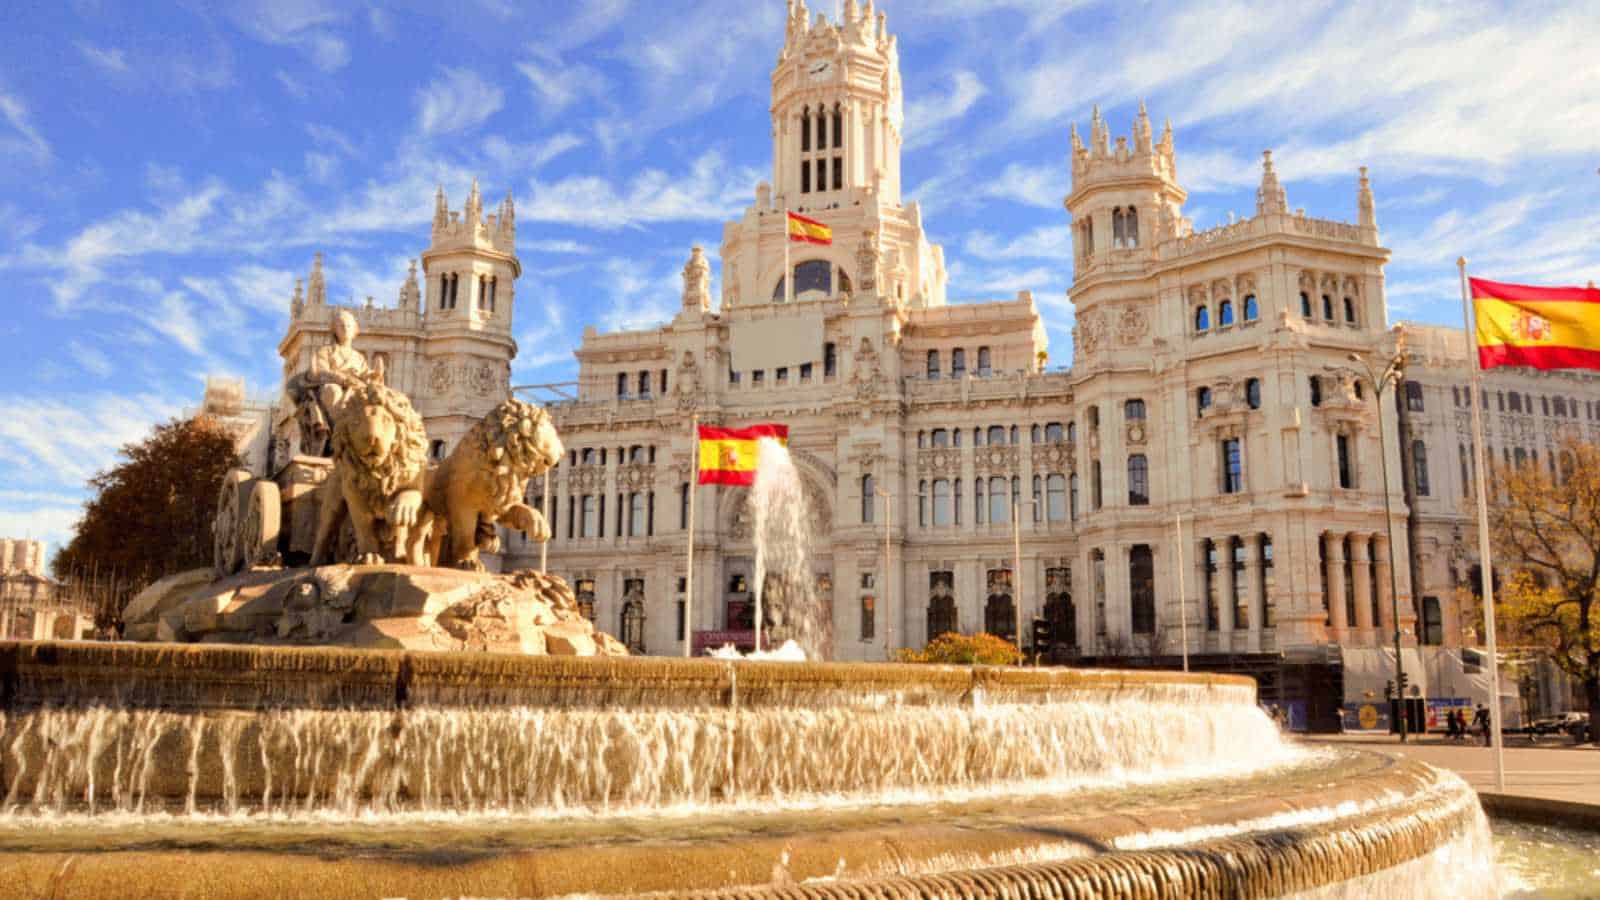 The famous Cibeles fountain in Madrid, Spain